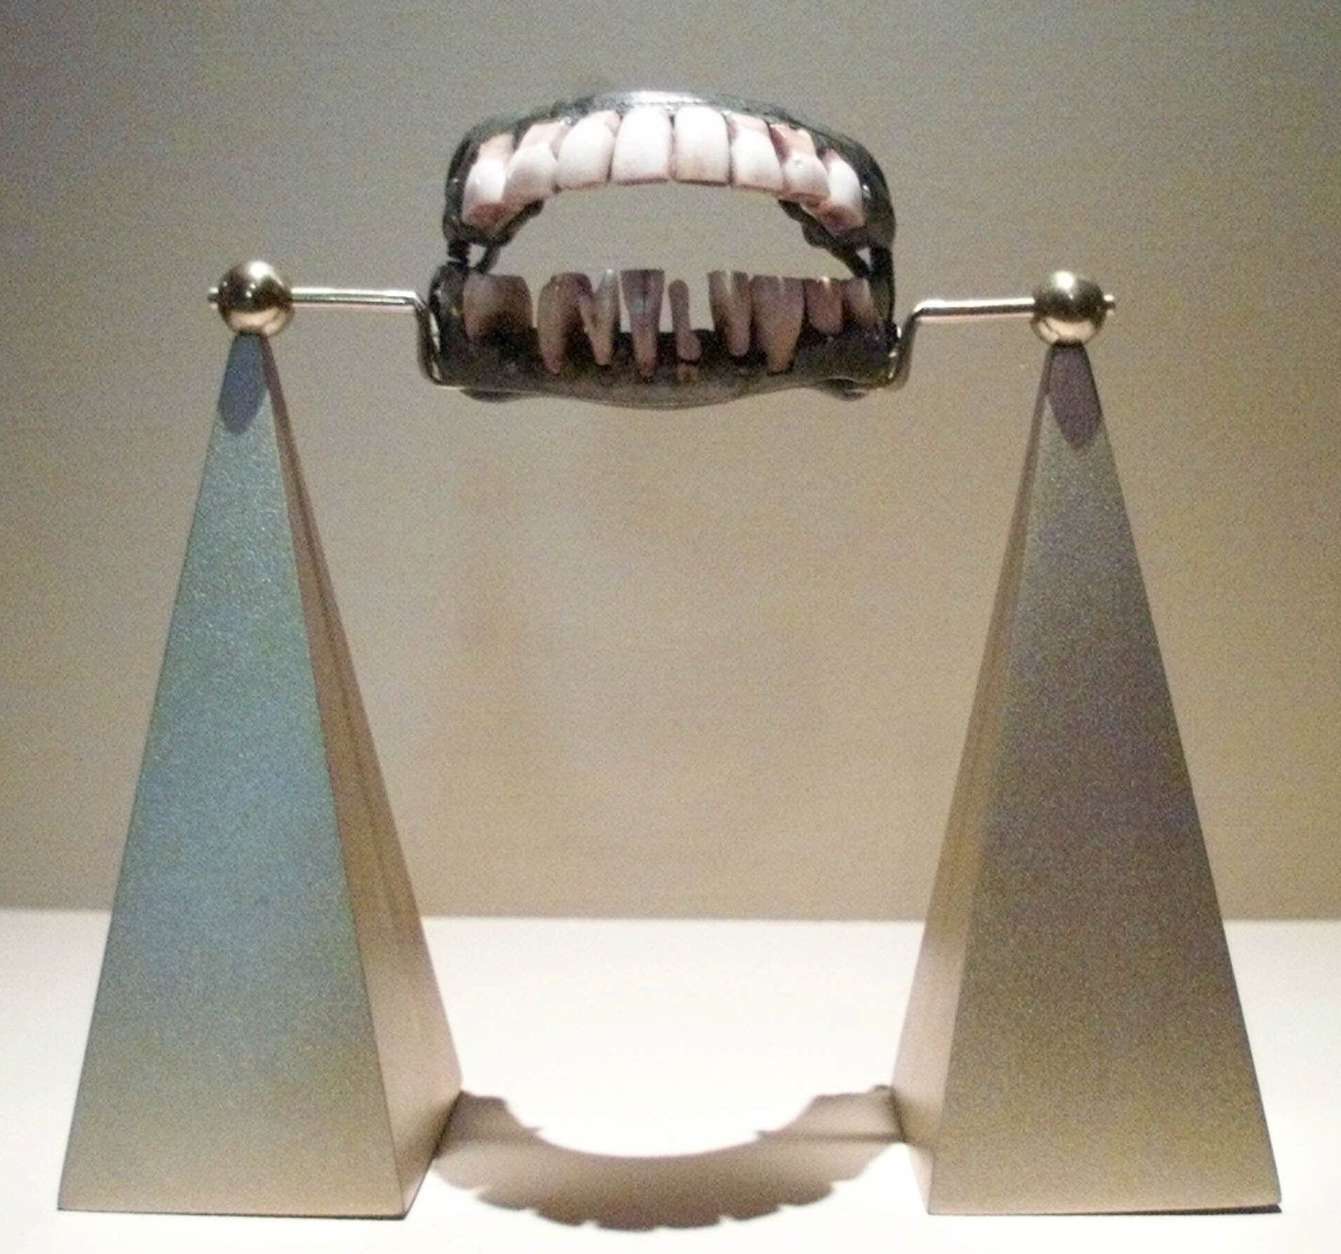 George Washington's dentures are shown after their installation into a display at the Heinz Regional History Center in Pittsburgh, Monday, July 24, 2000. The teeth, part of a temporary exhibit on George Washington at the museum that opens on Saturday, July 29, are not carved from wood, but made with human and cow teeth according to Mount Vernon Estate collections manager Rebecca Eddins. (AP Photo/Keith Srakocic)